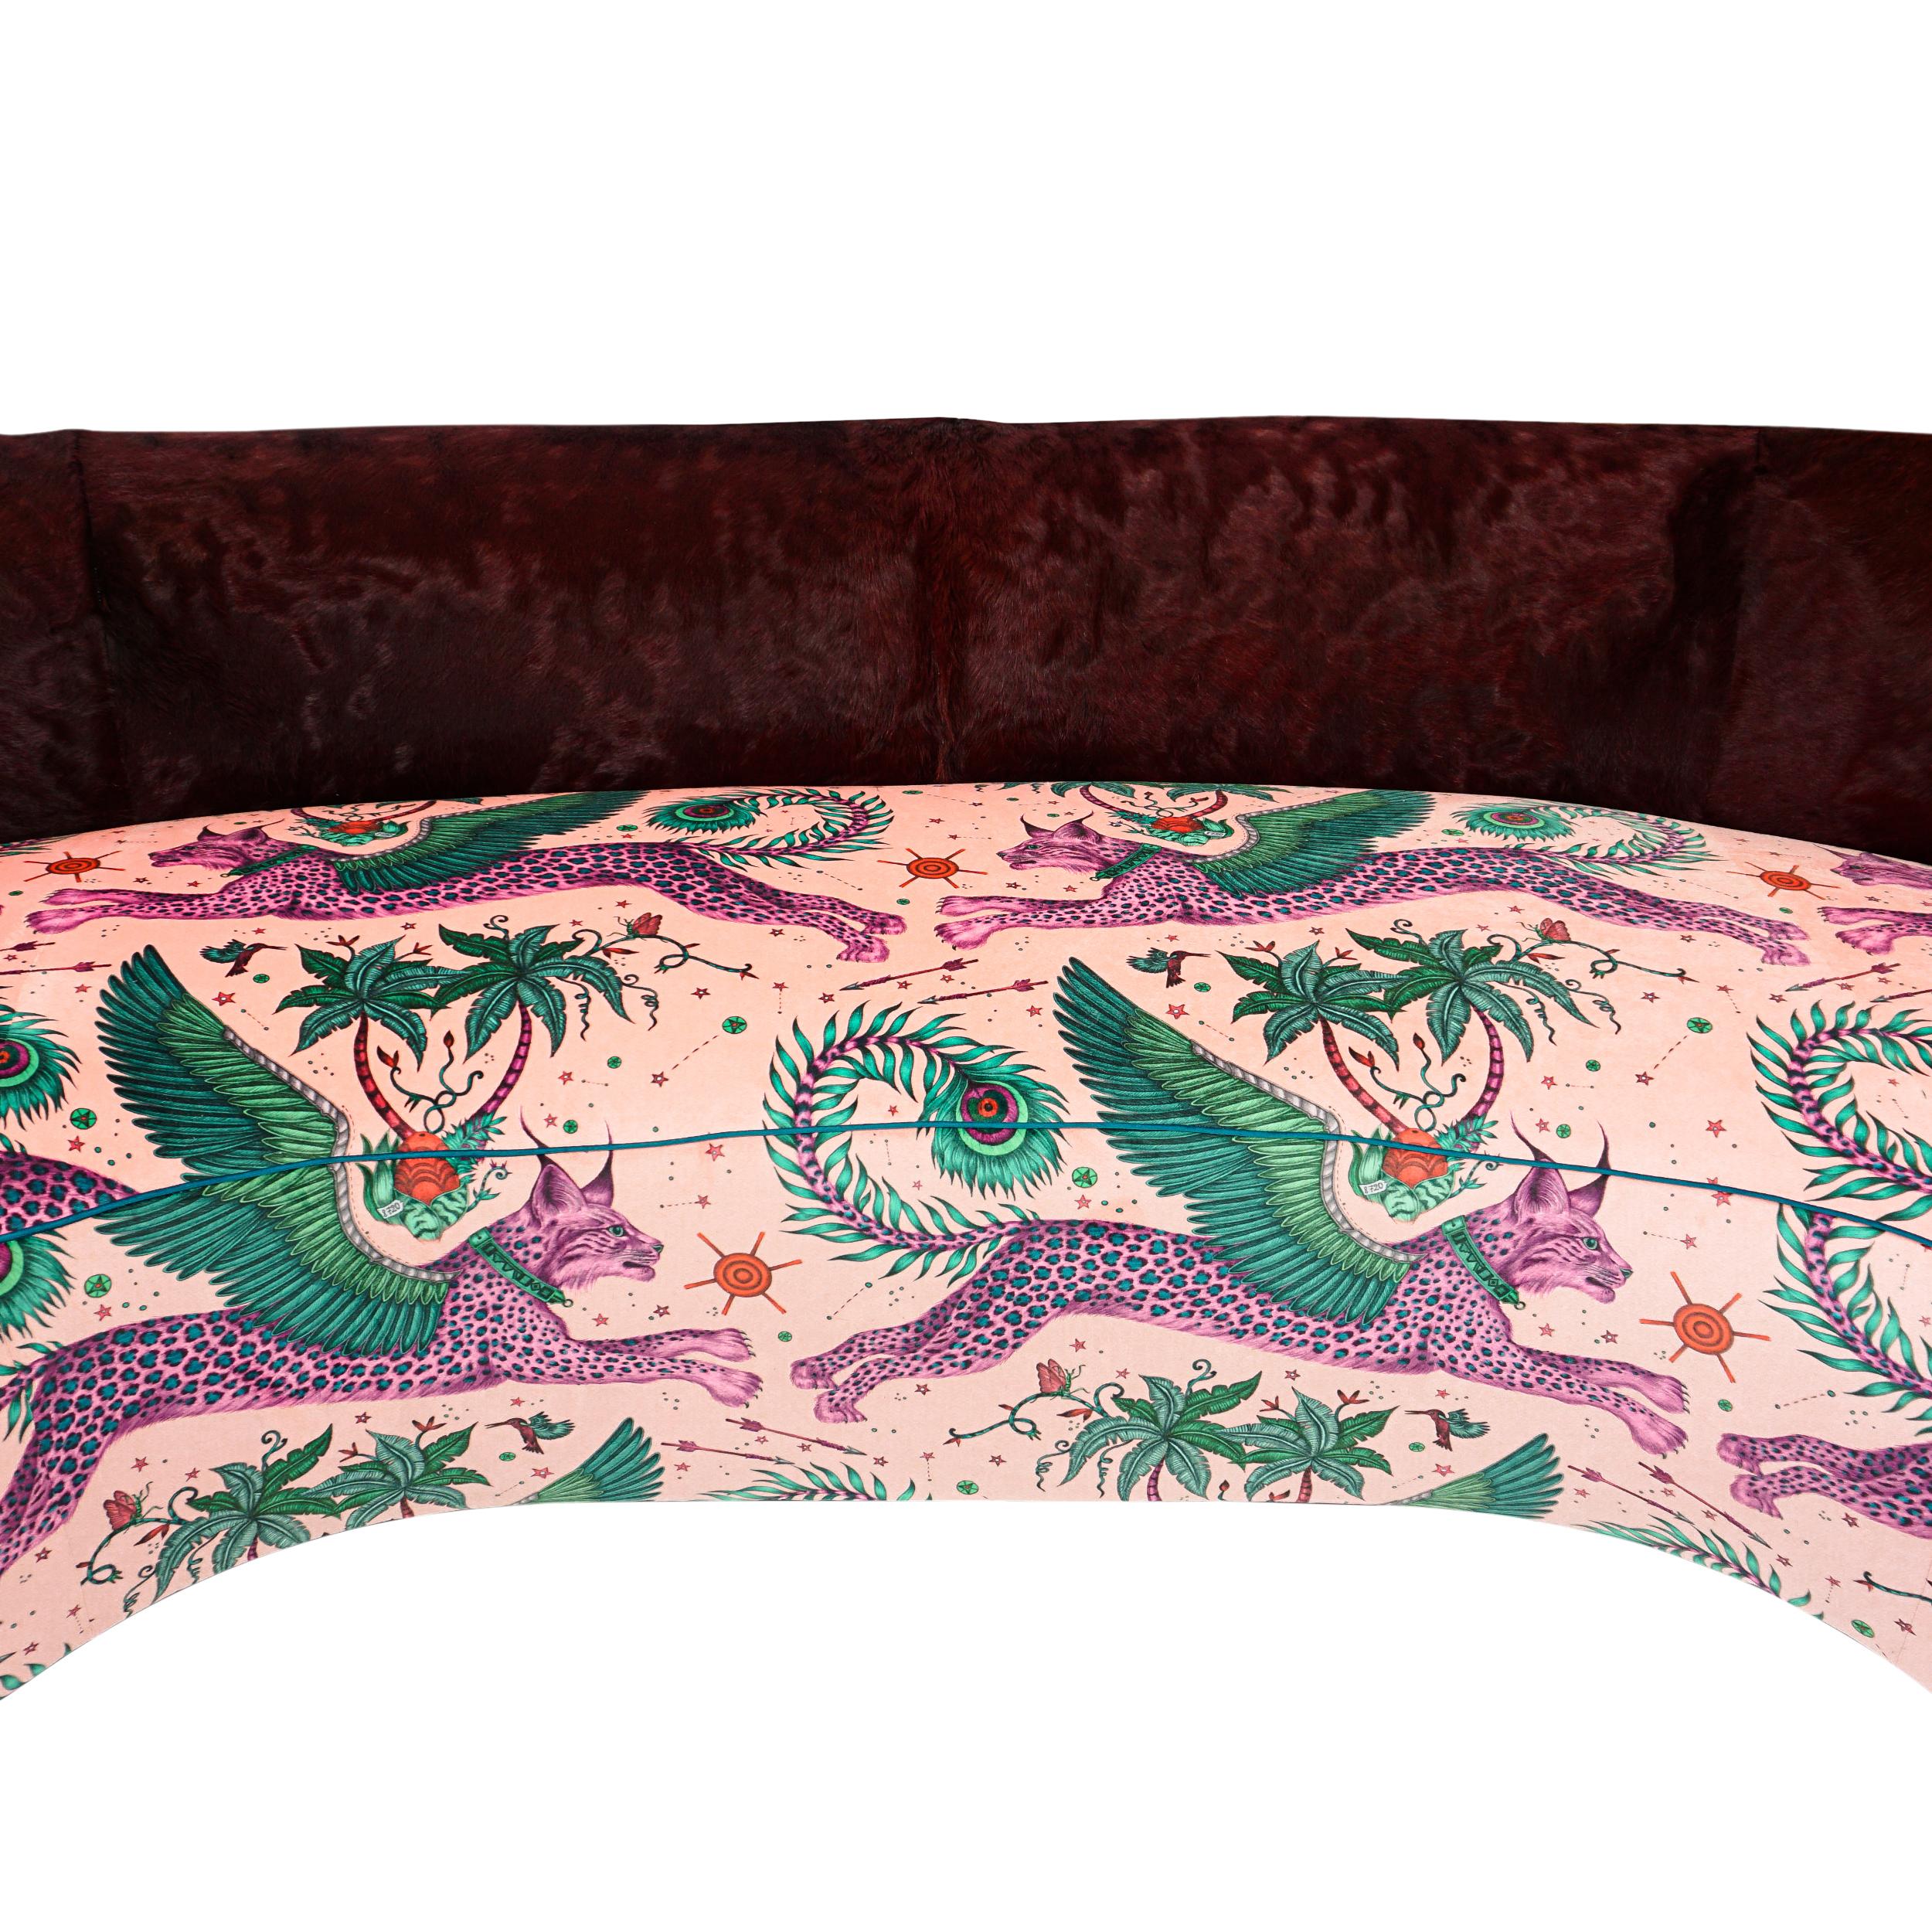 Curved Sofa with Oxblood Cowhide and Fantastical Printed Velvet, Slope Arm For Sale 6